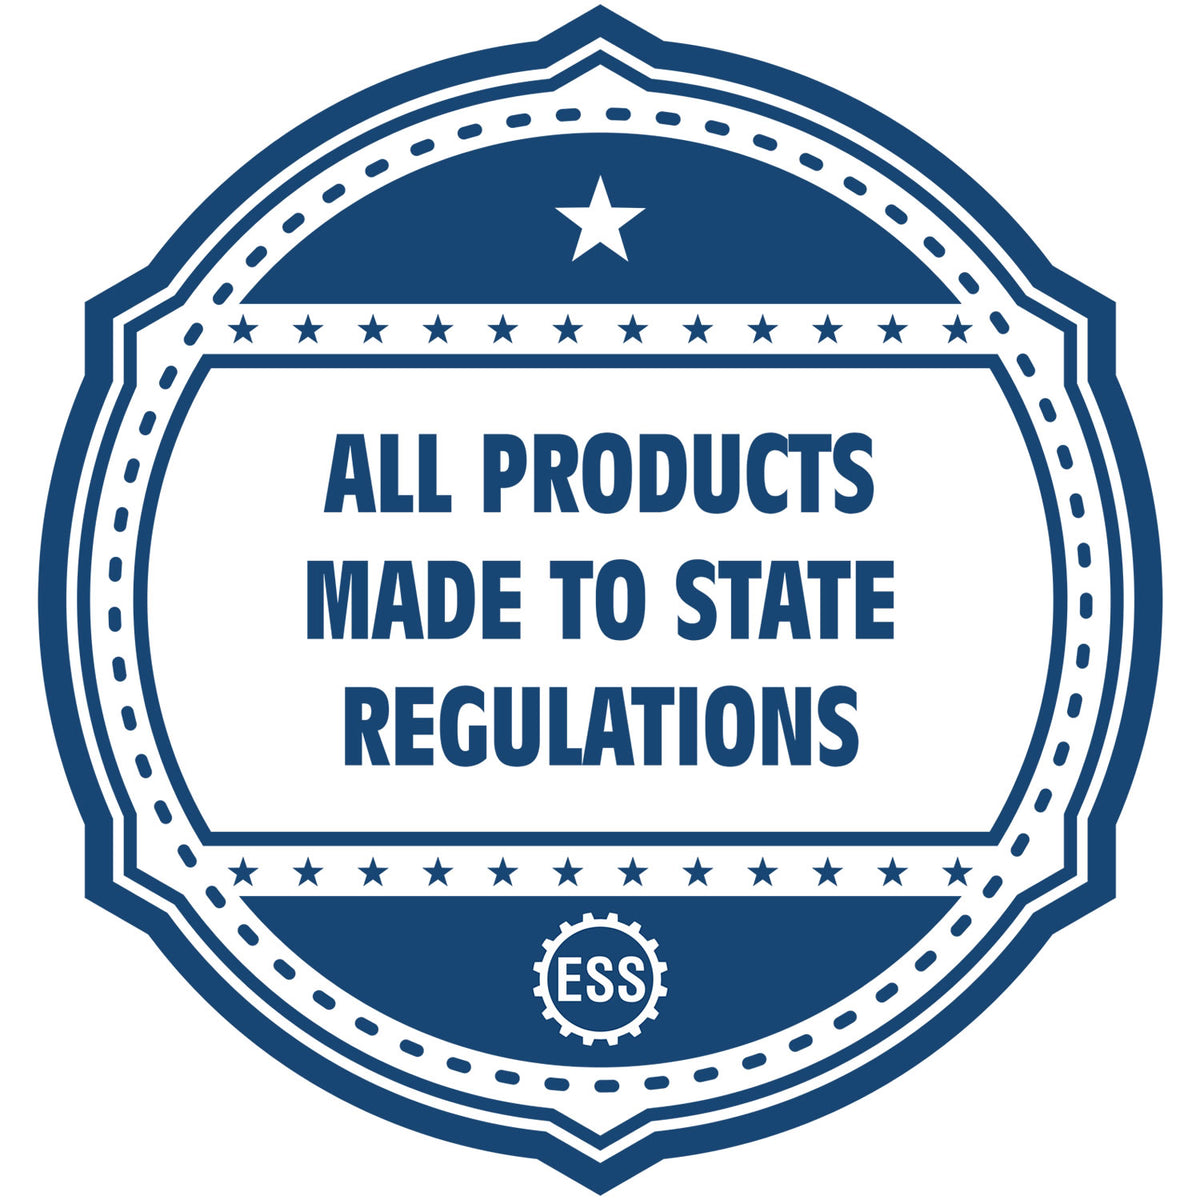 A blue icon or badge for the Gift Ohio Landscape Architect Seal showing that this product is made in compliance with state regulations.